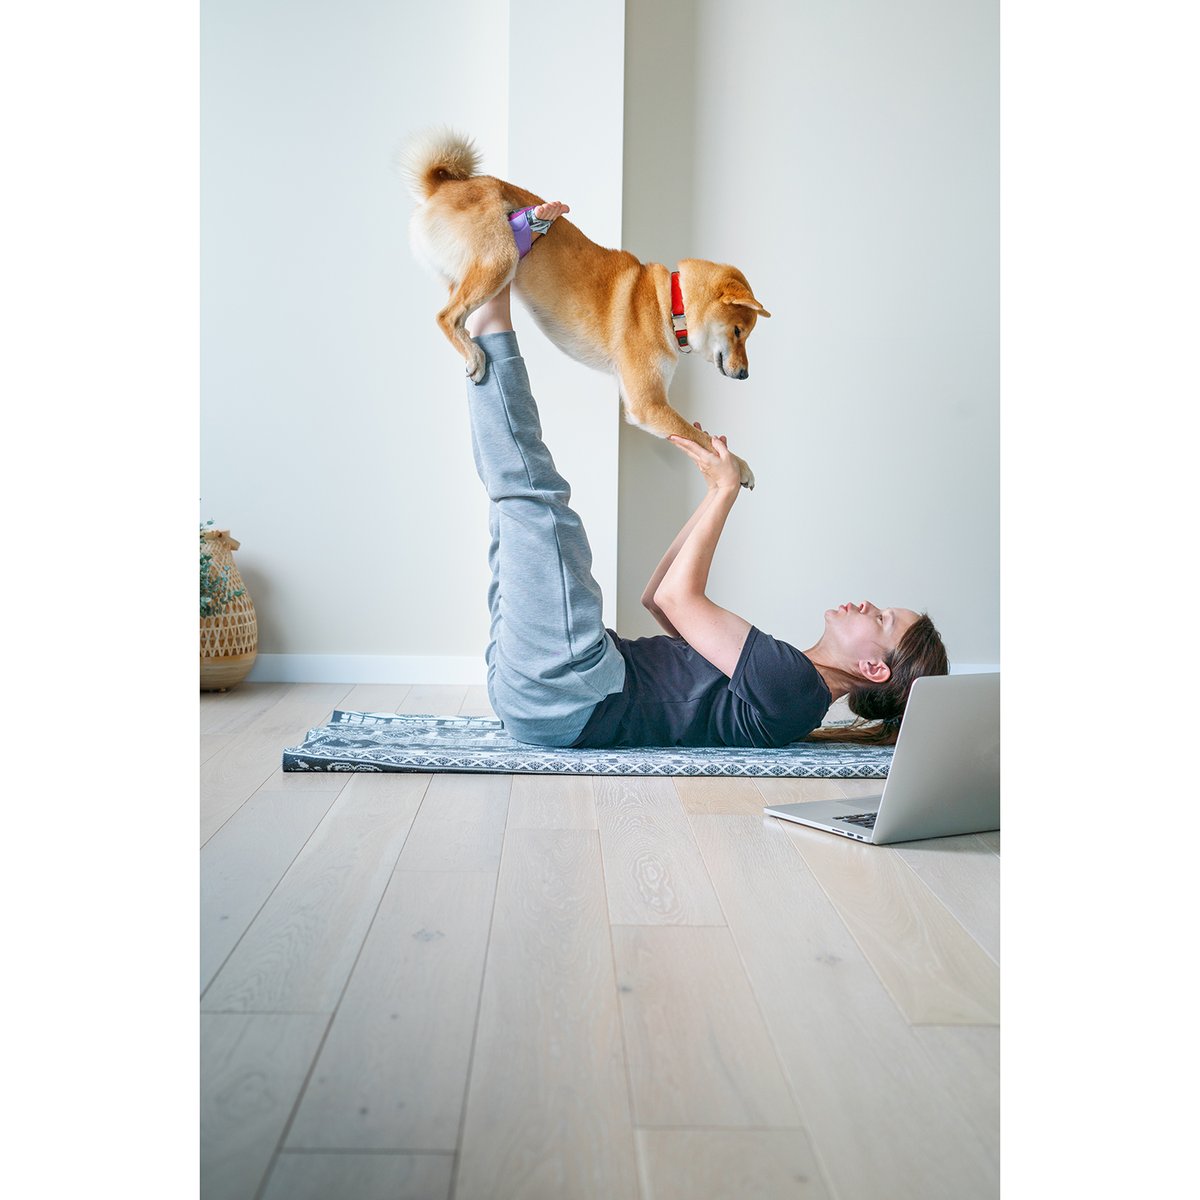 Invite a friend to join for #NationalYogaMonth! Our #PetFriendlyHotel means you never have to leave your furry friend at home, and never have to practice yoga alone! #SonestaWhitePlains #SonestaHotel #StaySonesta